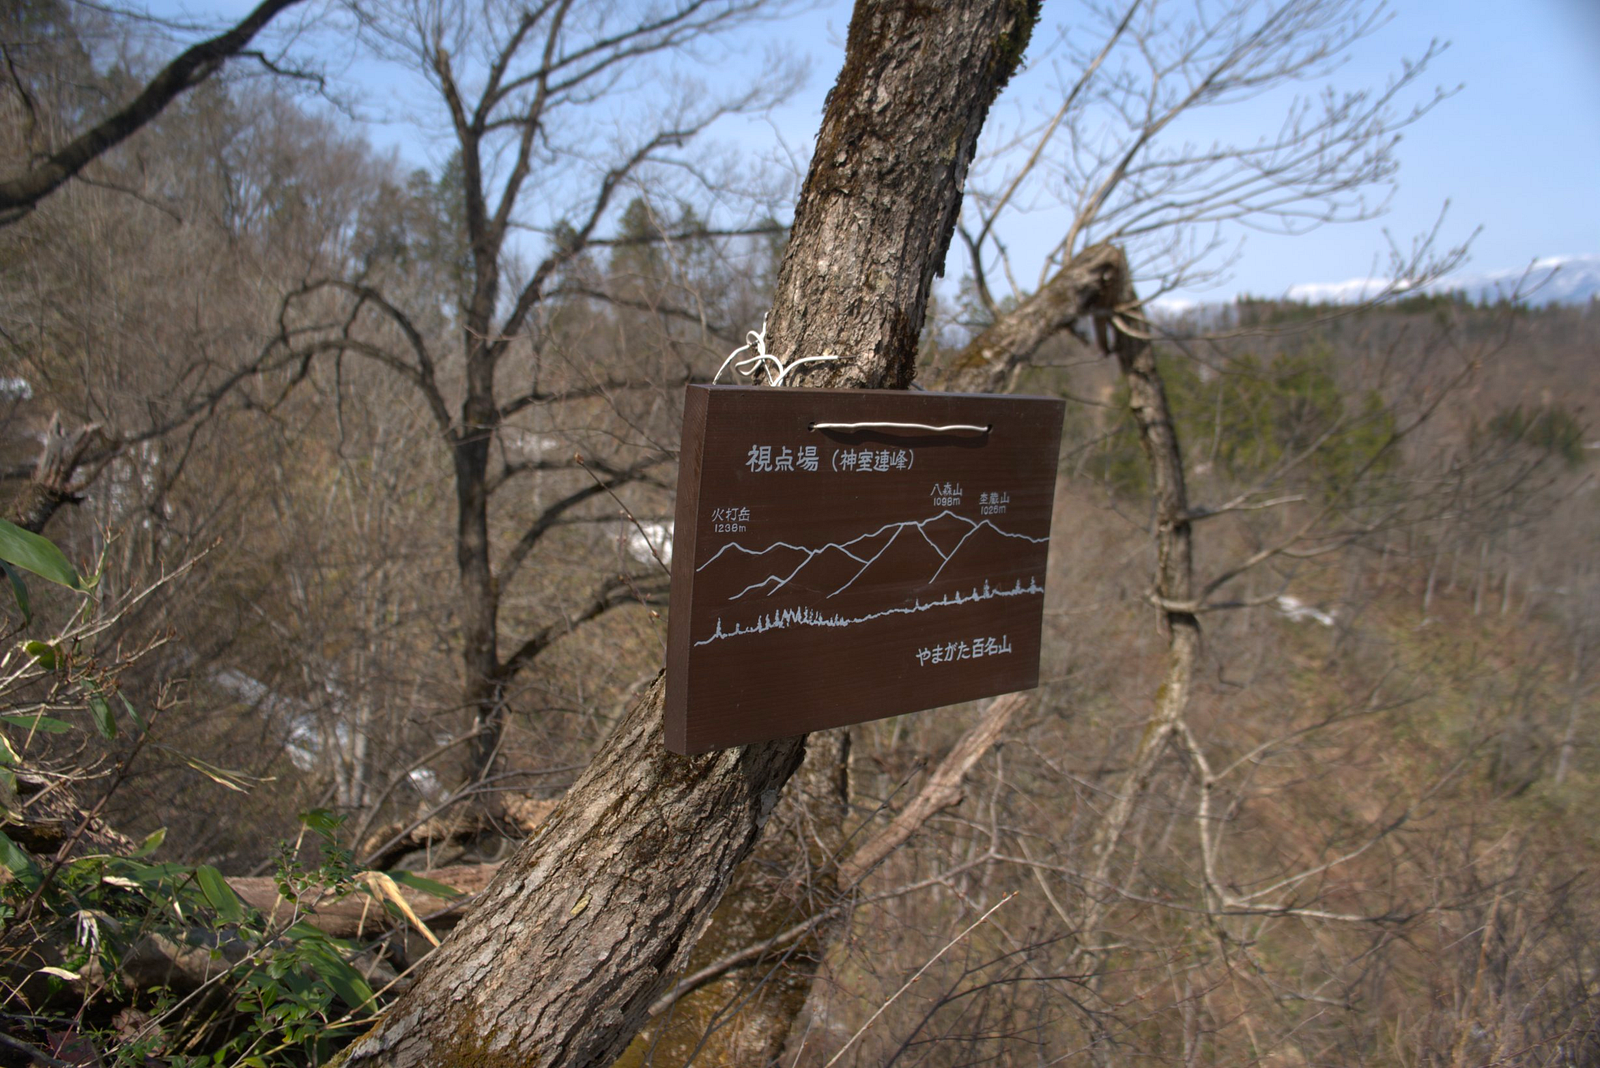 A sign on a tree along the path of Mt. Yamuki that shows the names of the surrounding mountains